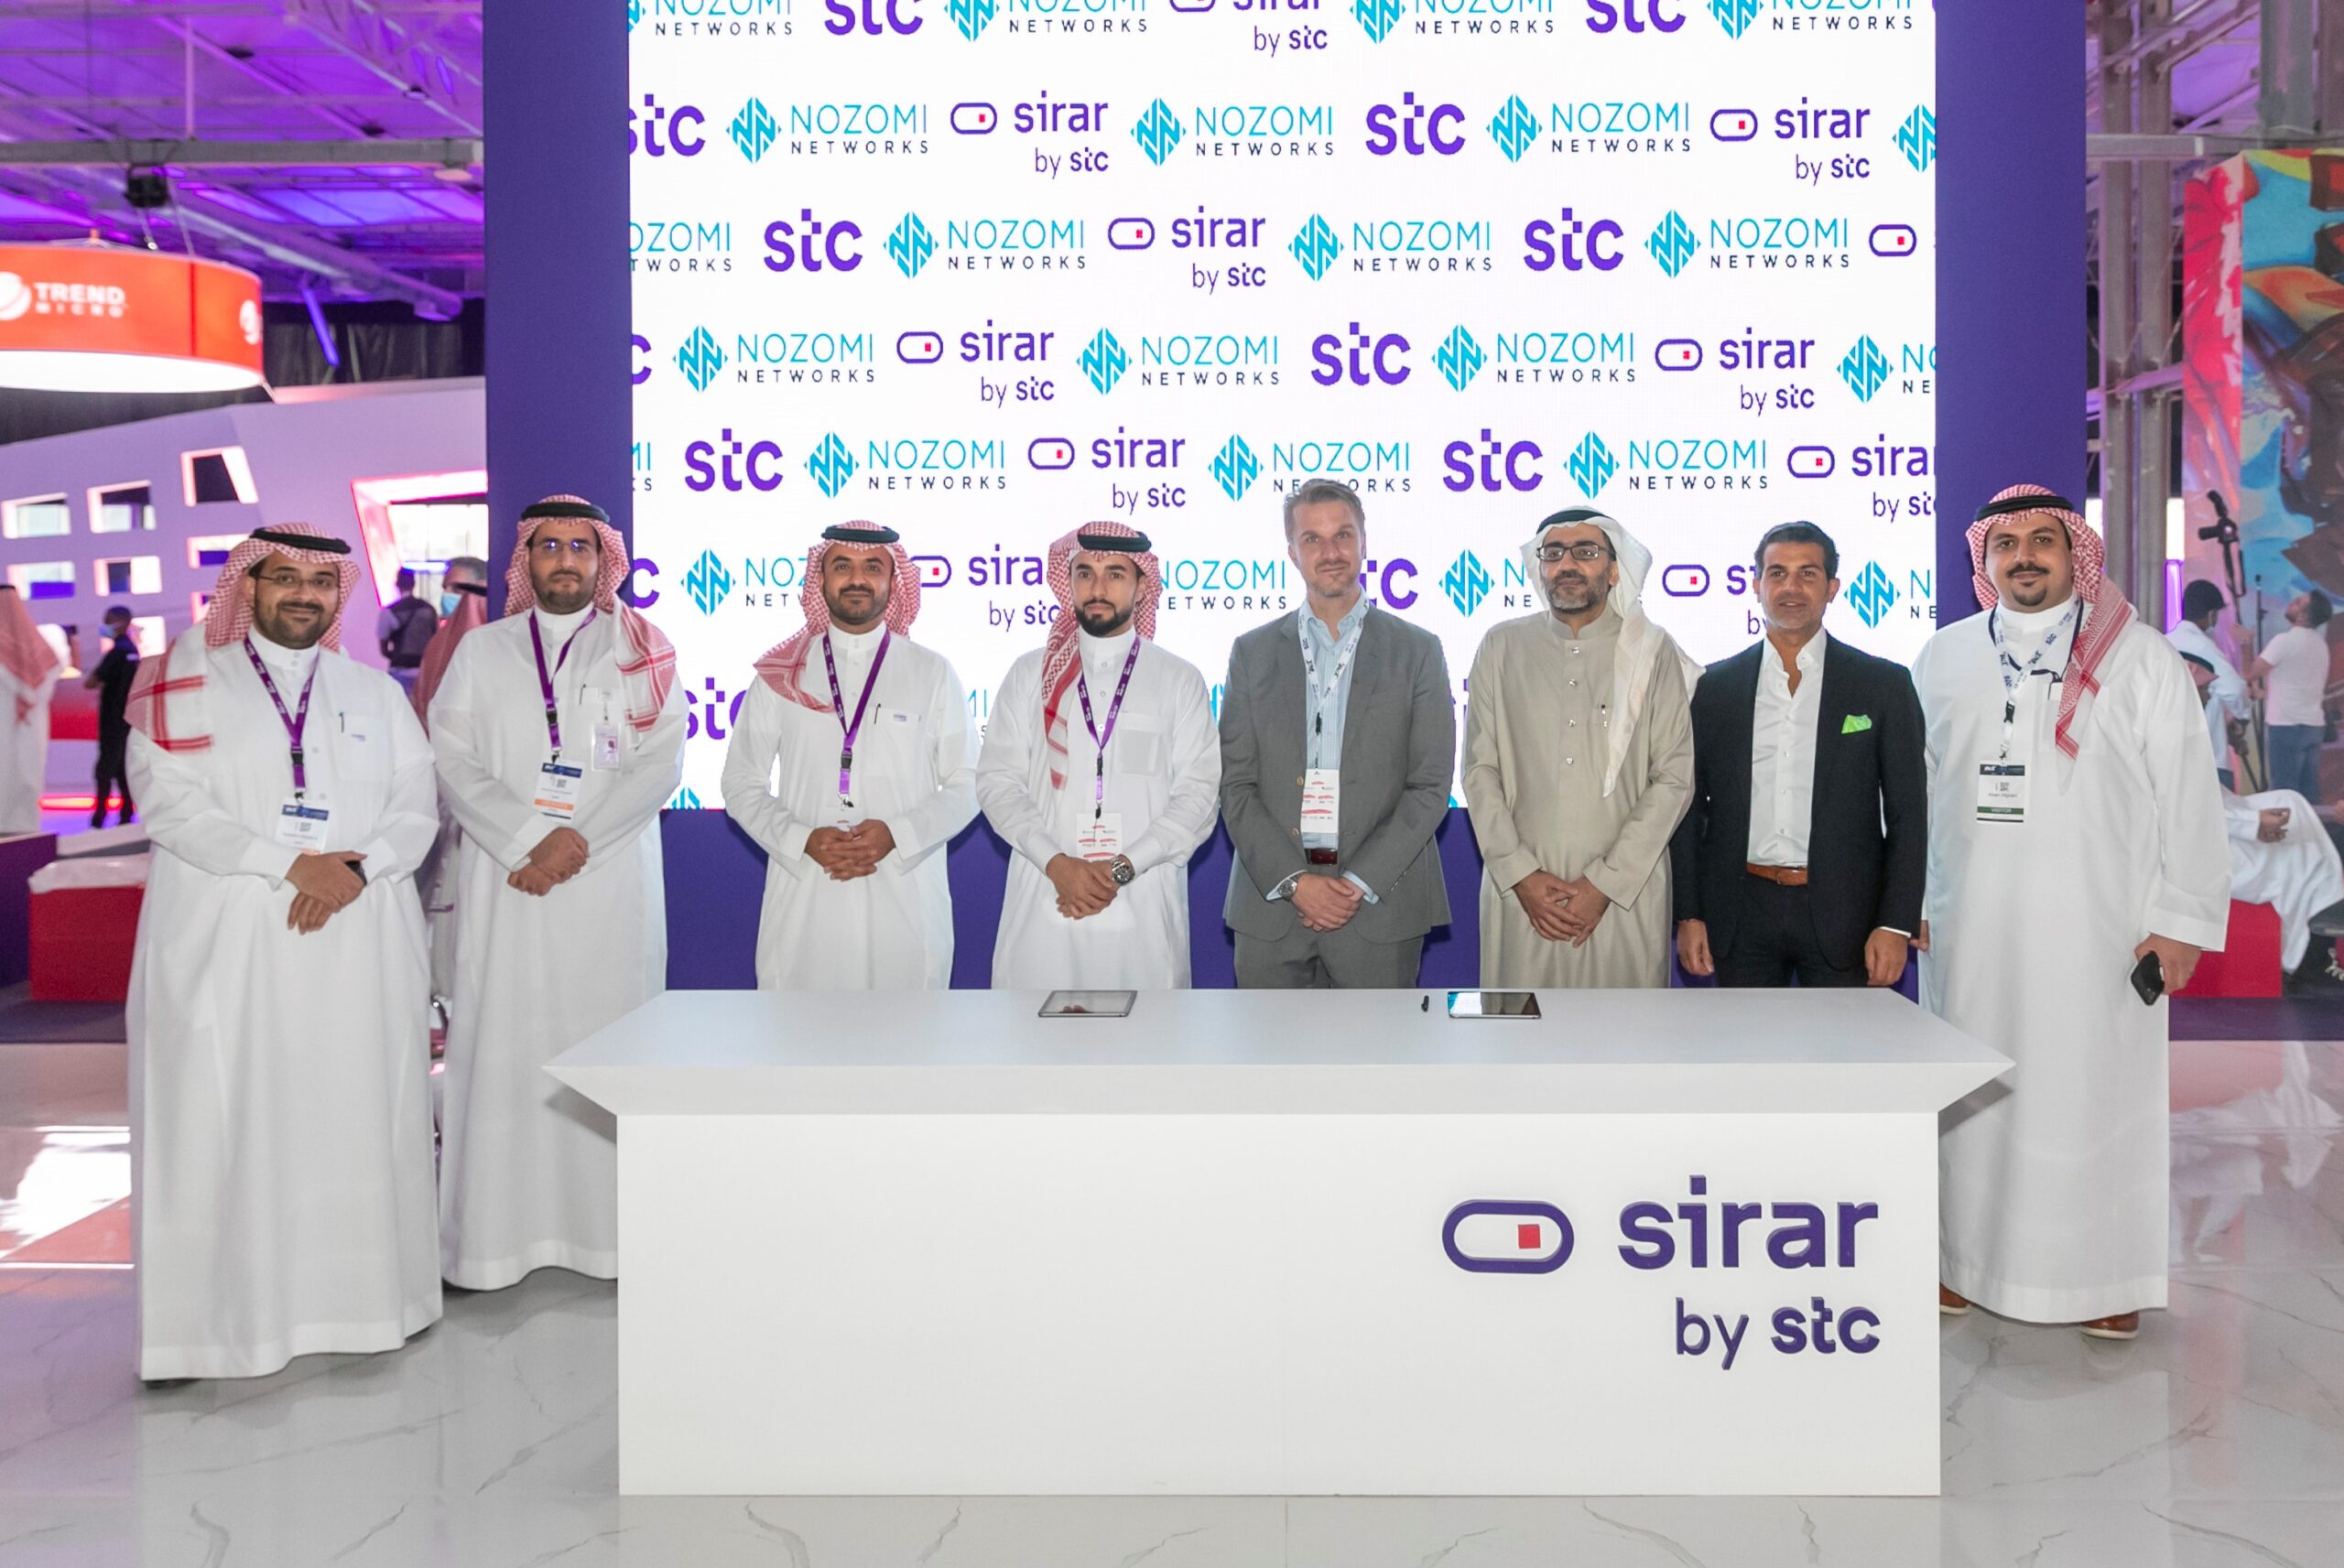 The STC and Nozomi Networks executives at the launch